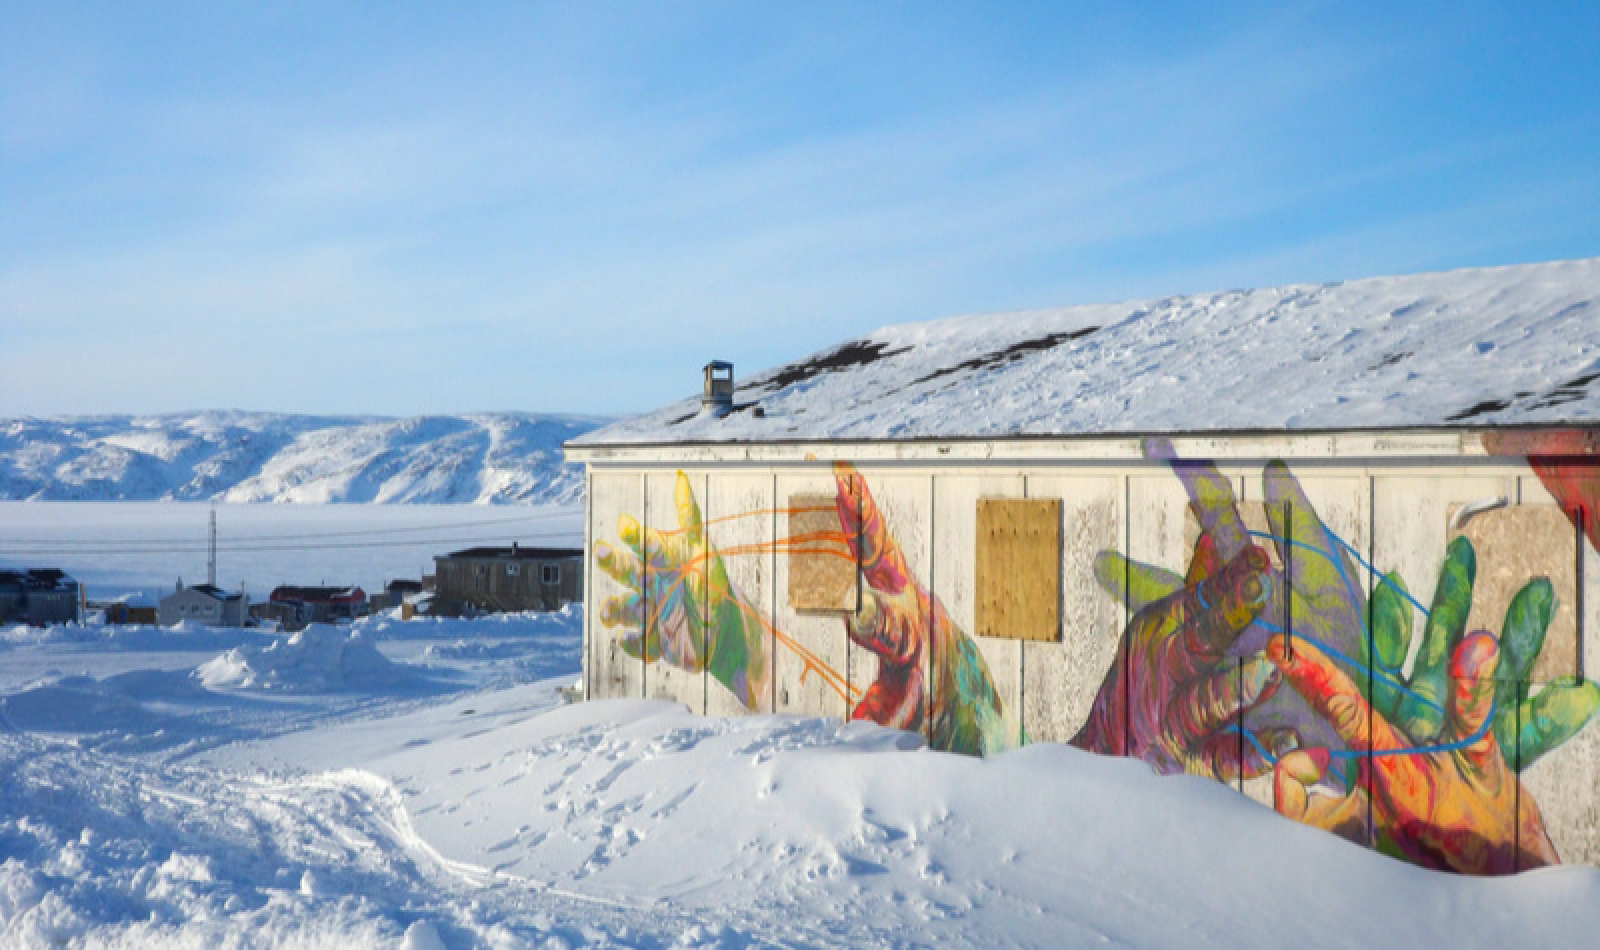 Inuit history, culture and contemporary realities